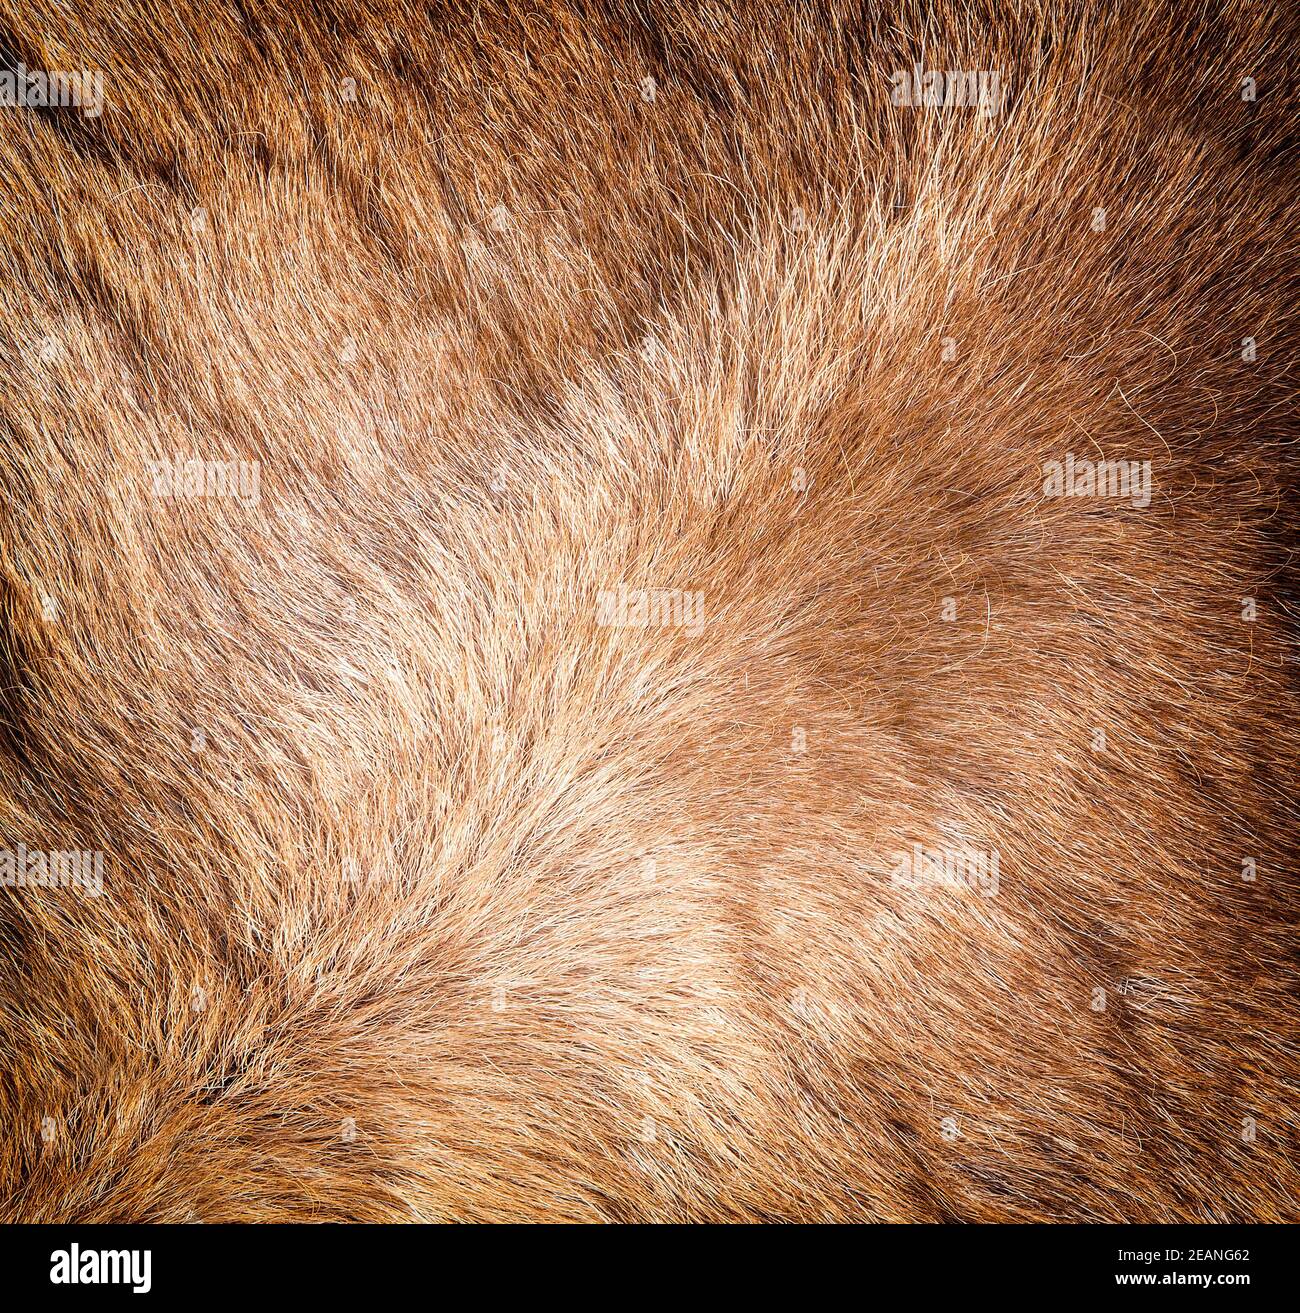 The new Colored reindeer fur texture. Stock Photo